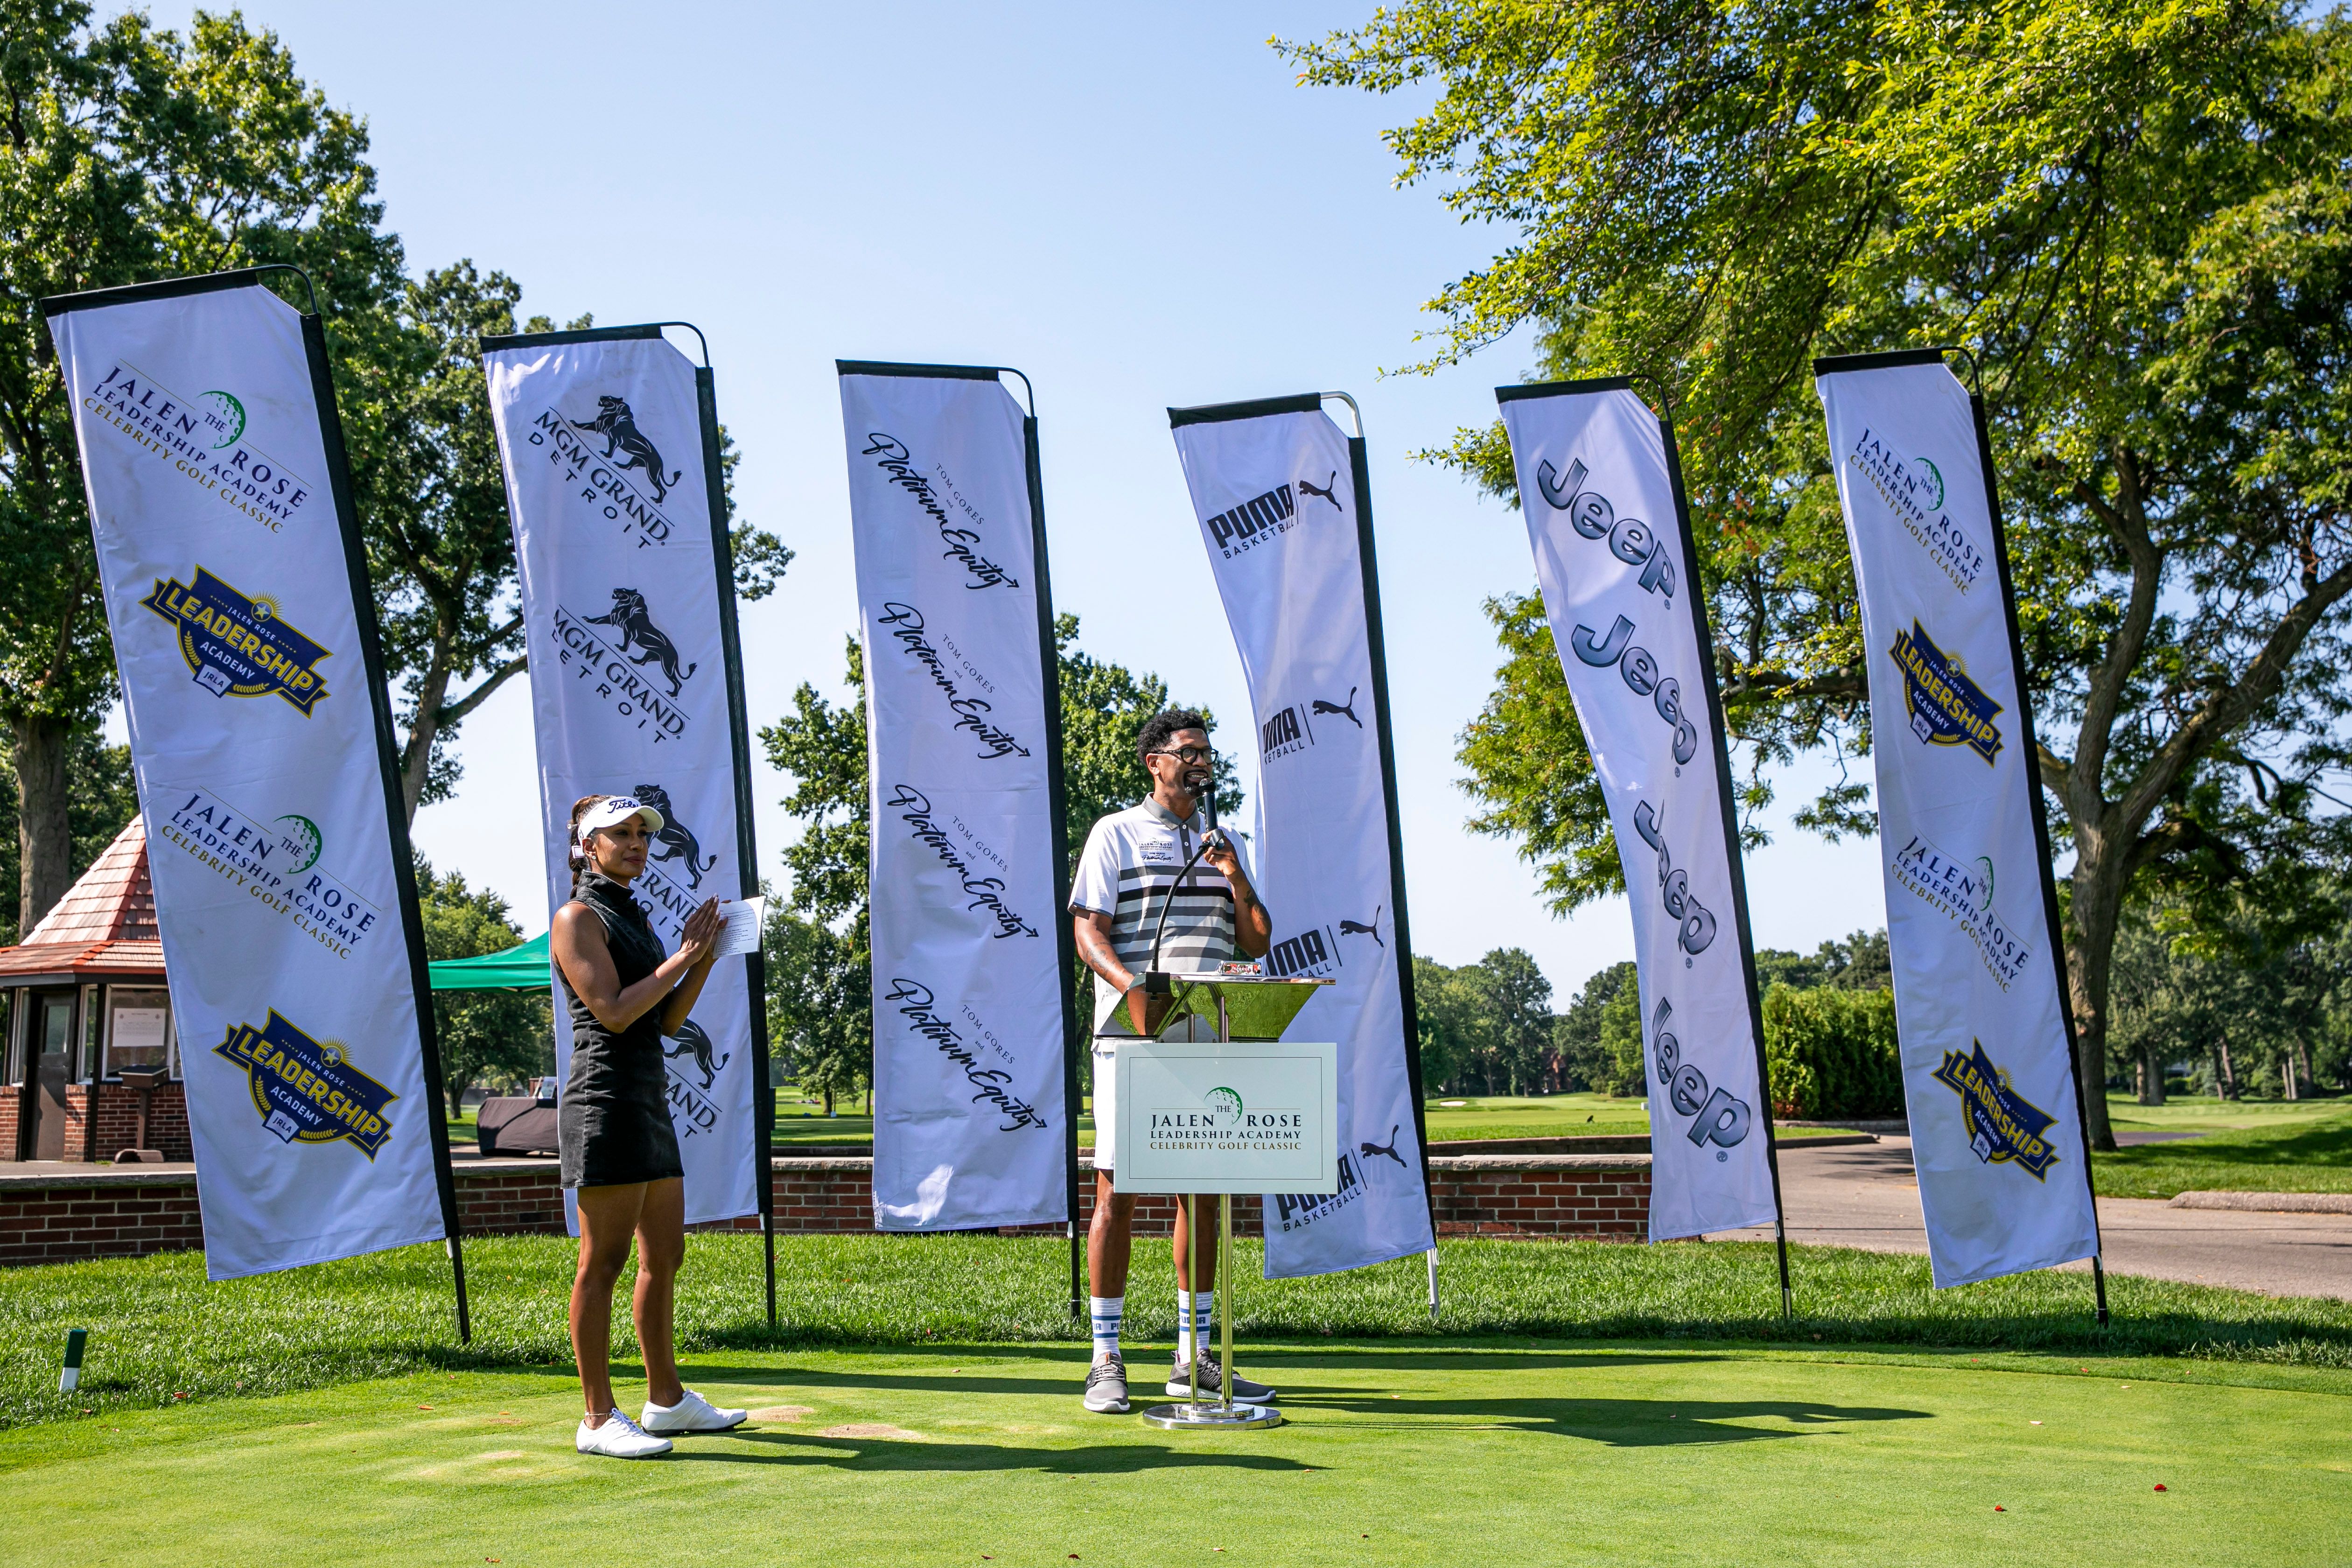 Seema Sadekar (L) and Jalen Rose (R) host the 11th annual Jalen Rose Golf Classic, A PGD Global Production, benefitting the Jalen Rose Leadership Academy at Detroit Golf Club.